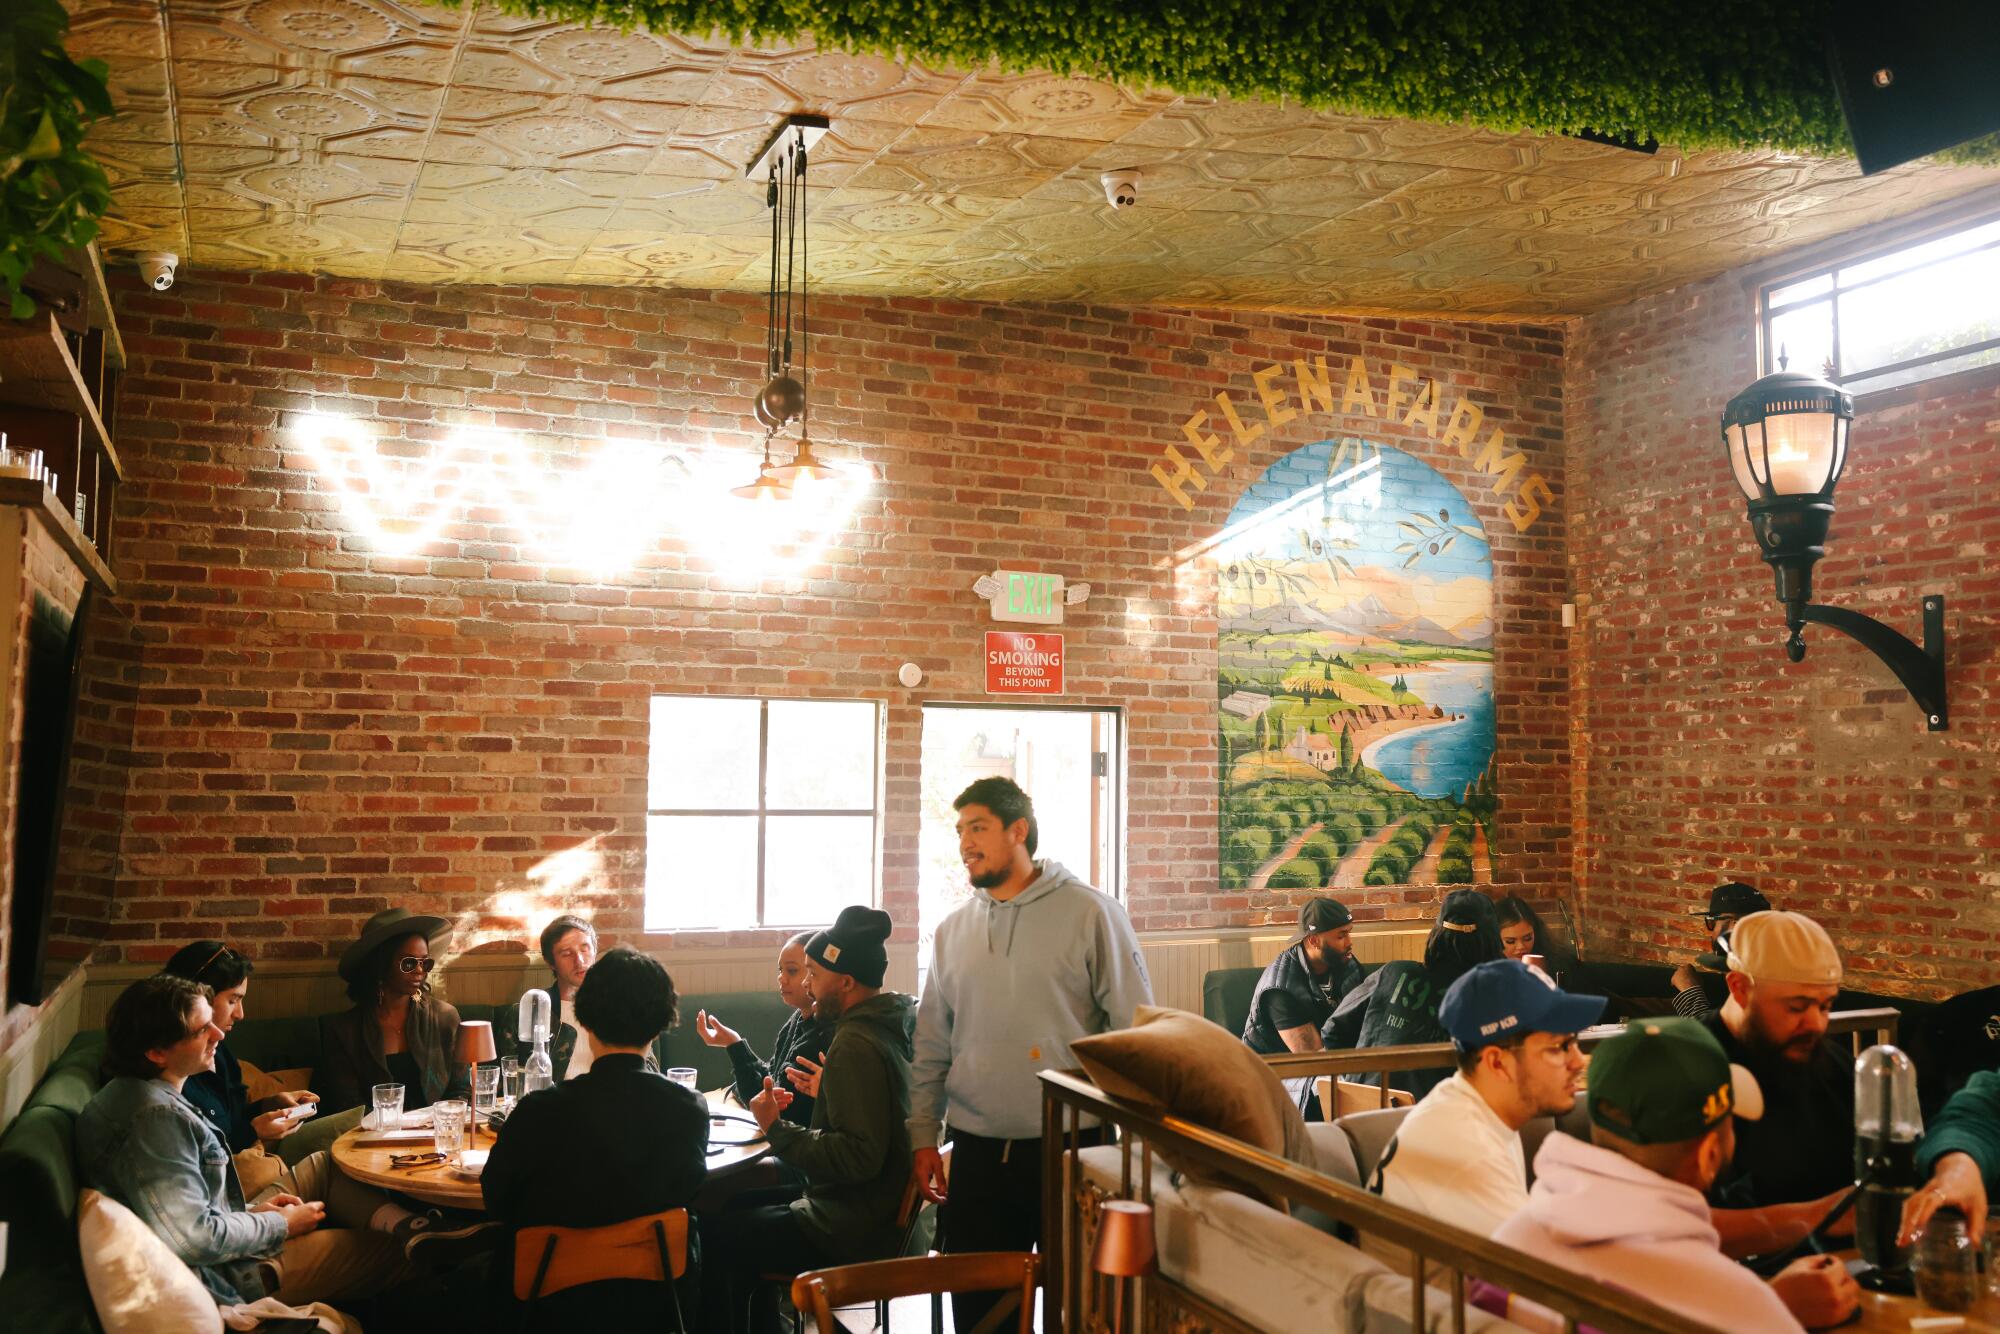 People sitting in a restaurant-like space with brick walls and art of cannabis brands.